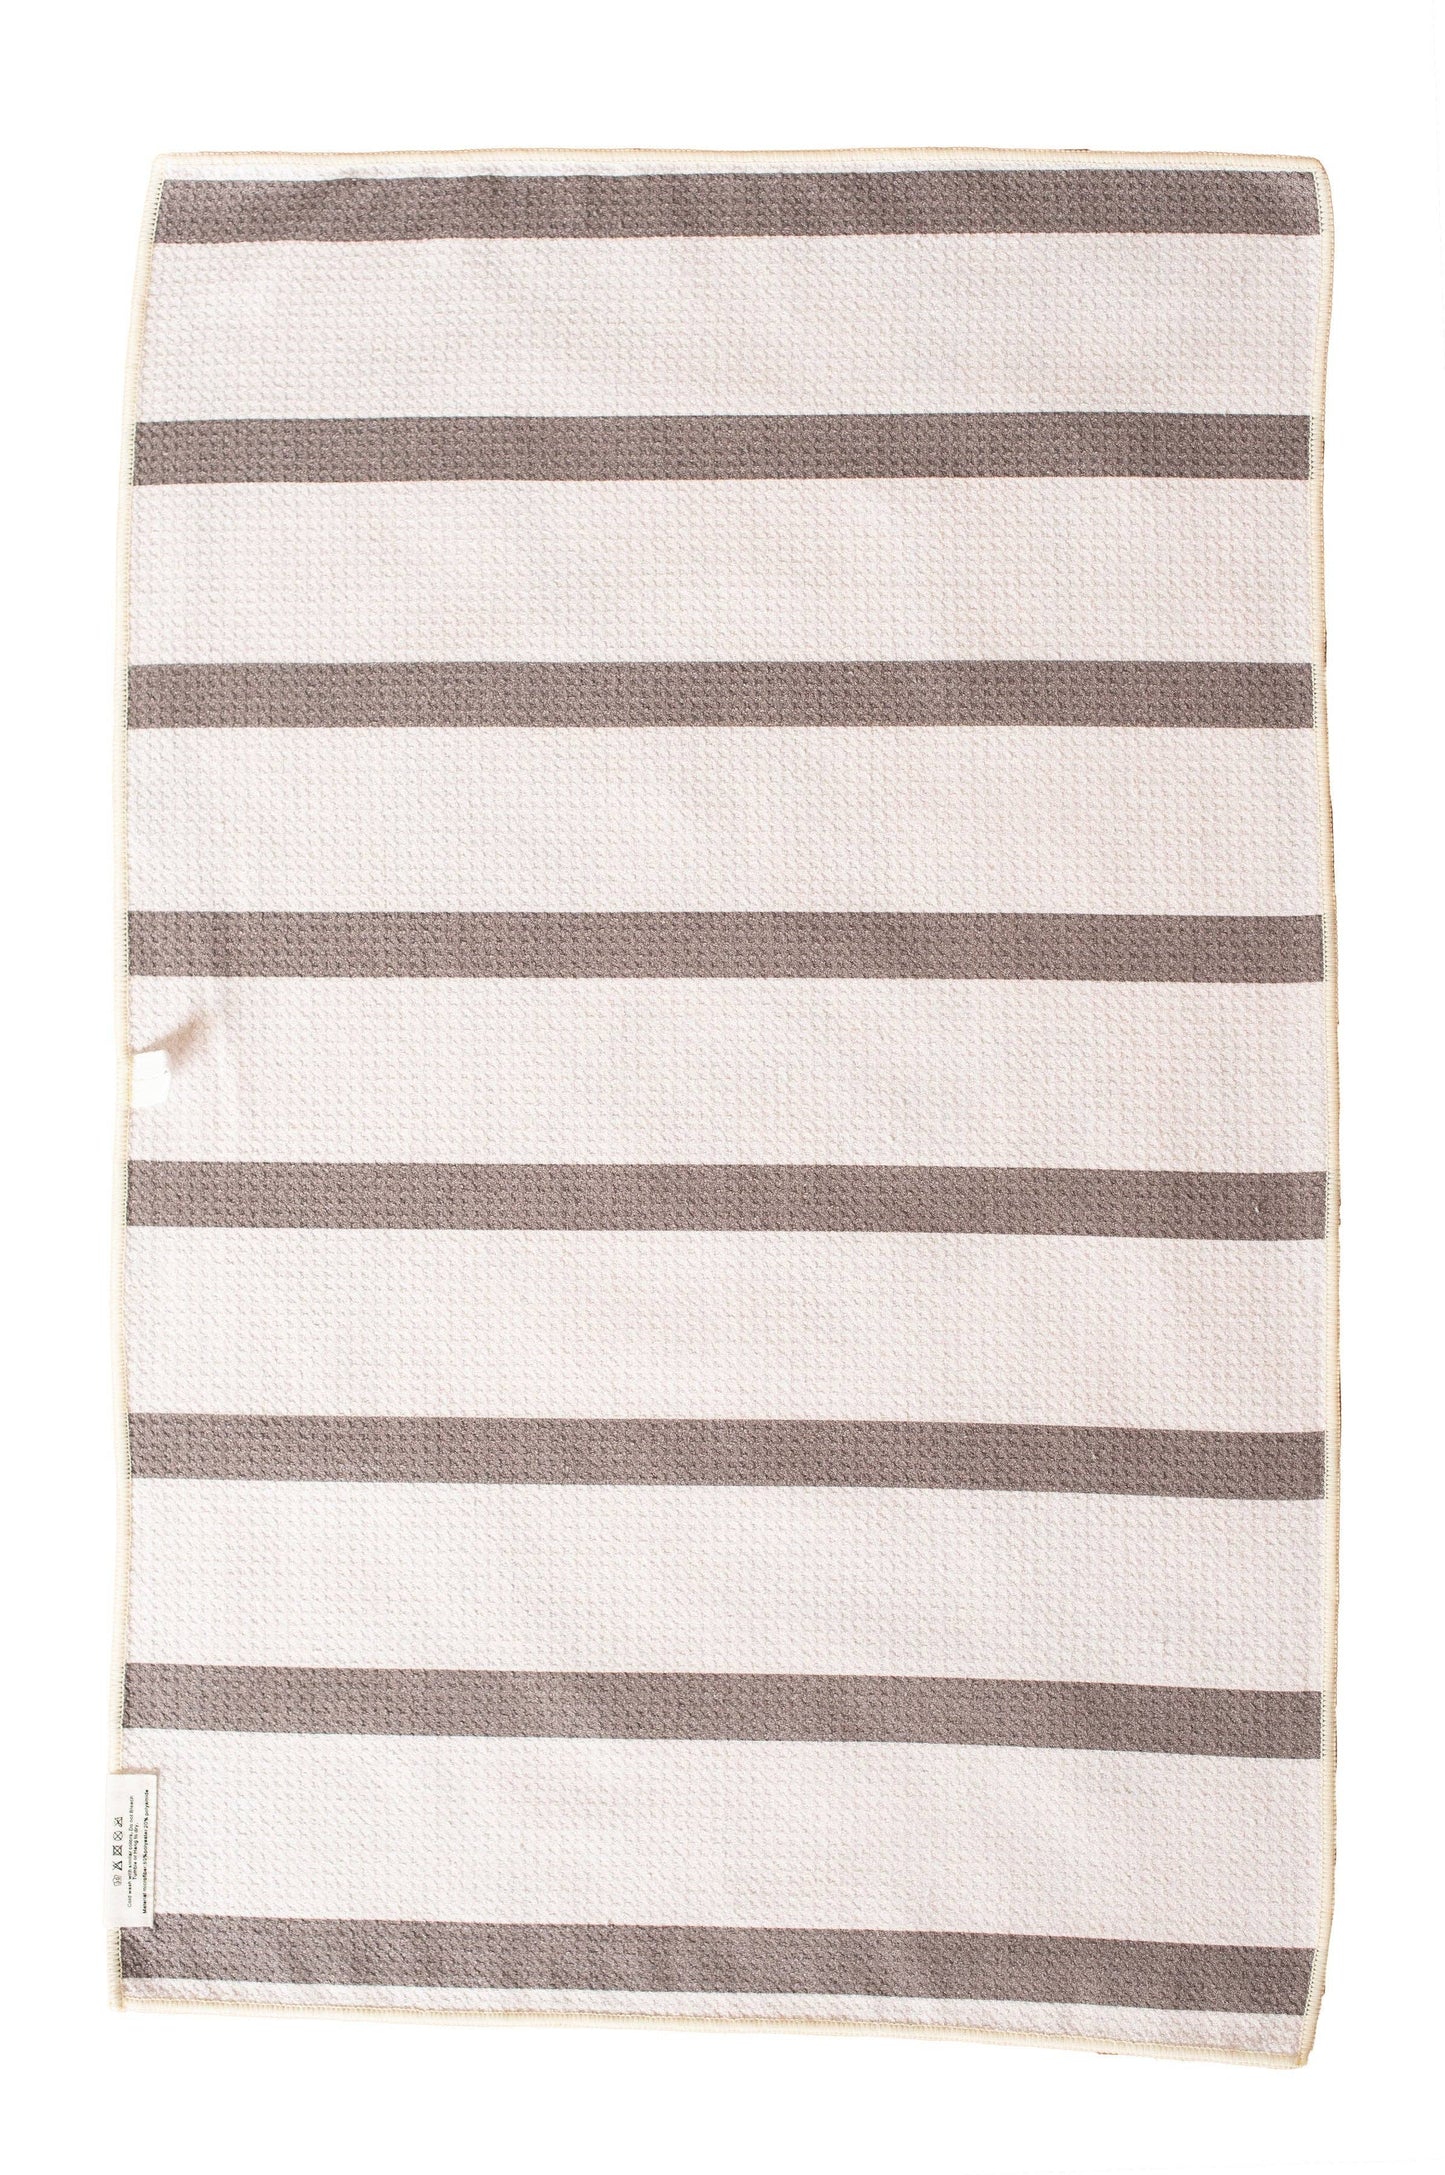 Double-Sided Towel